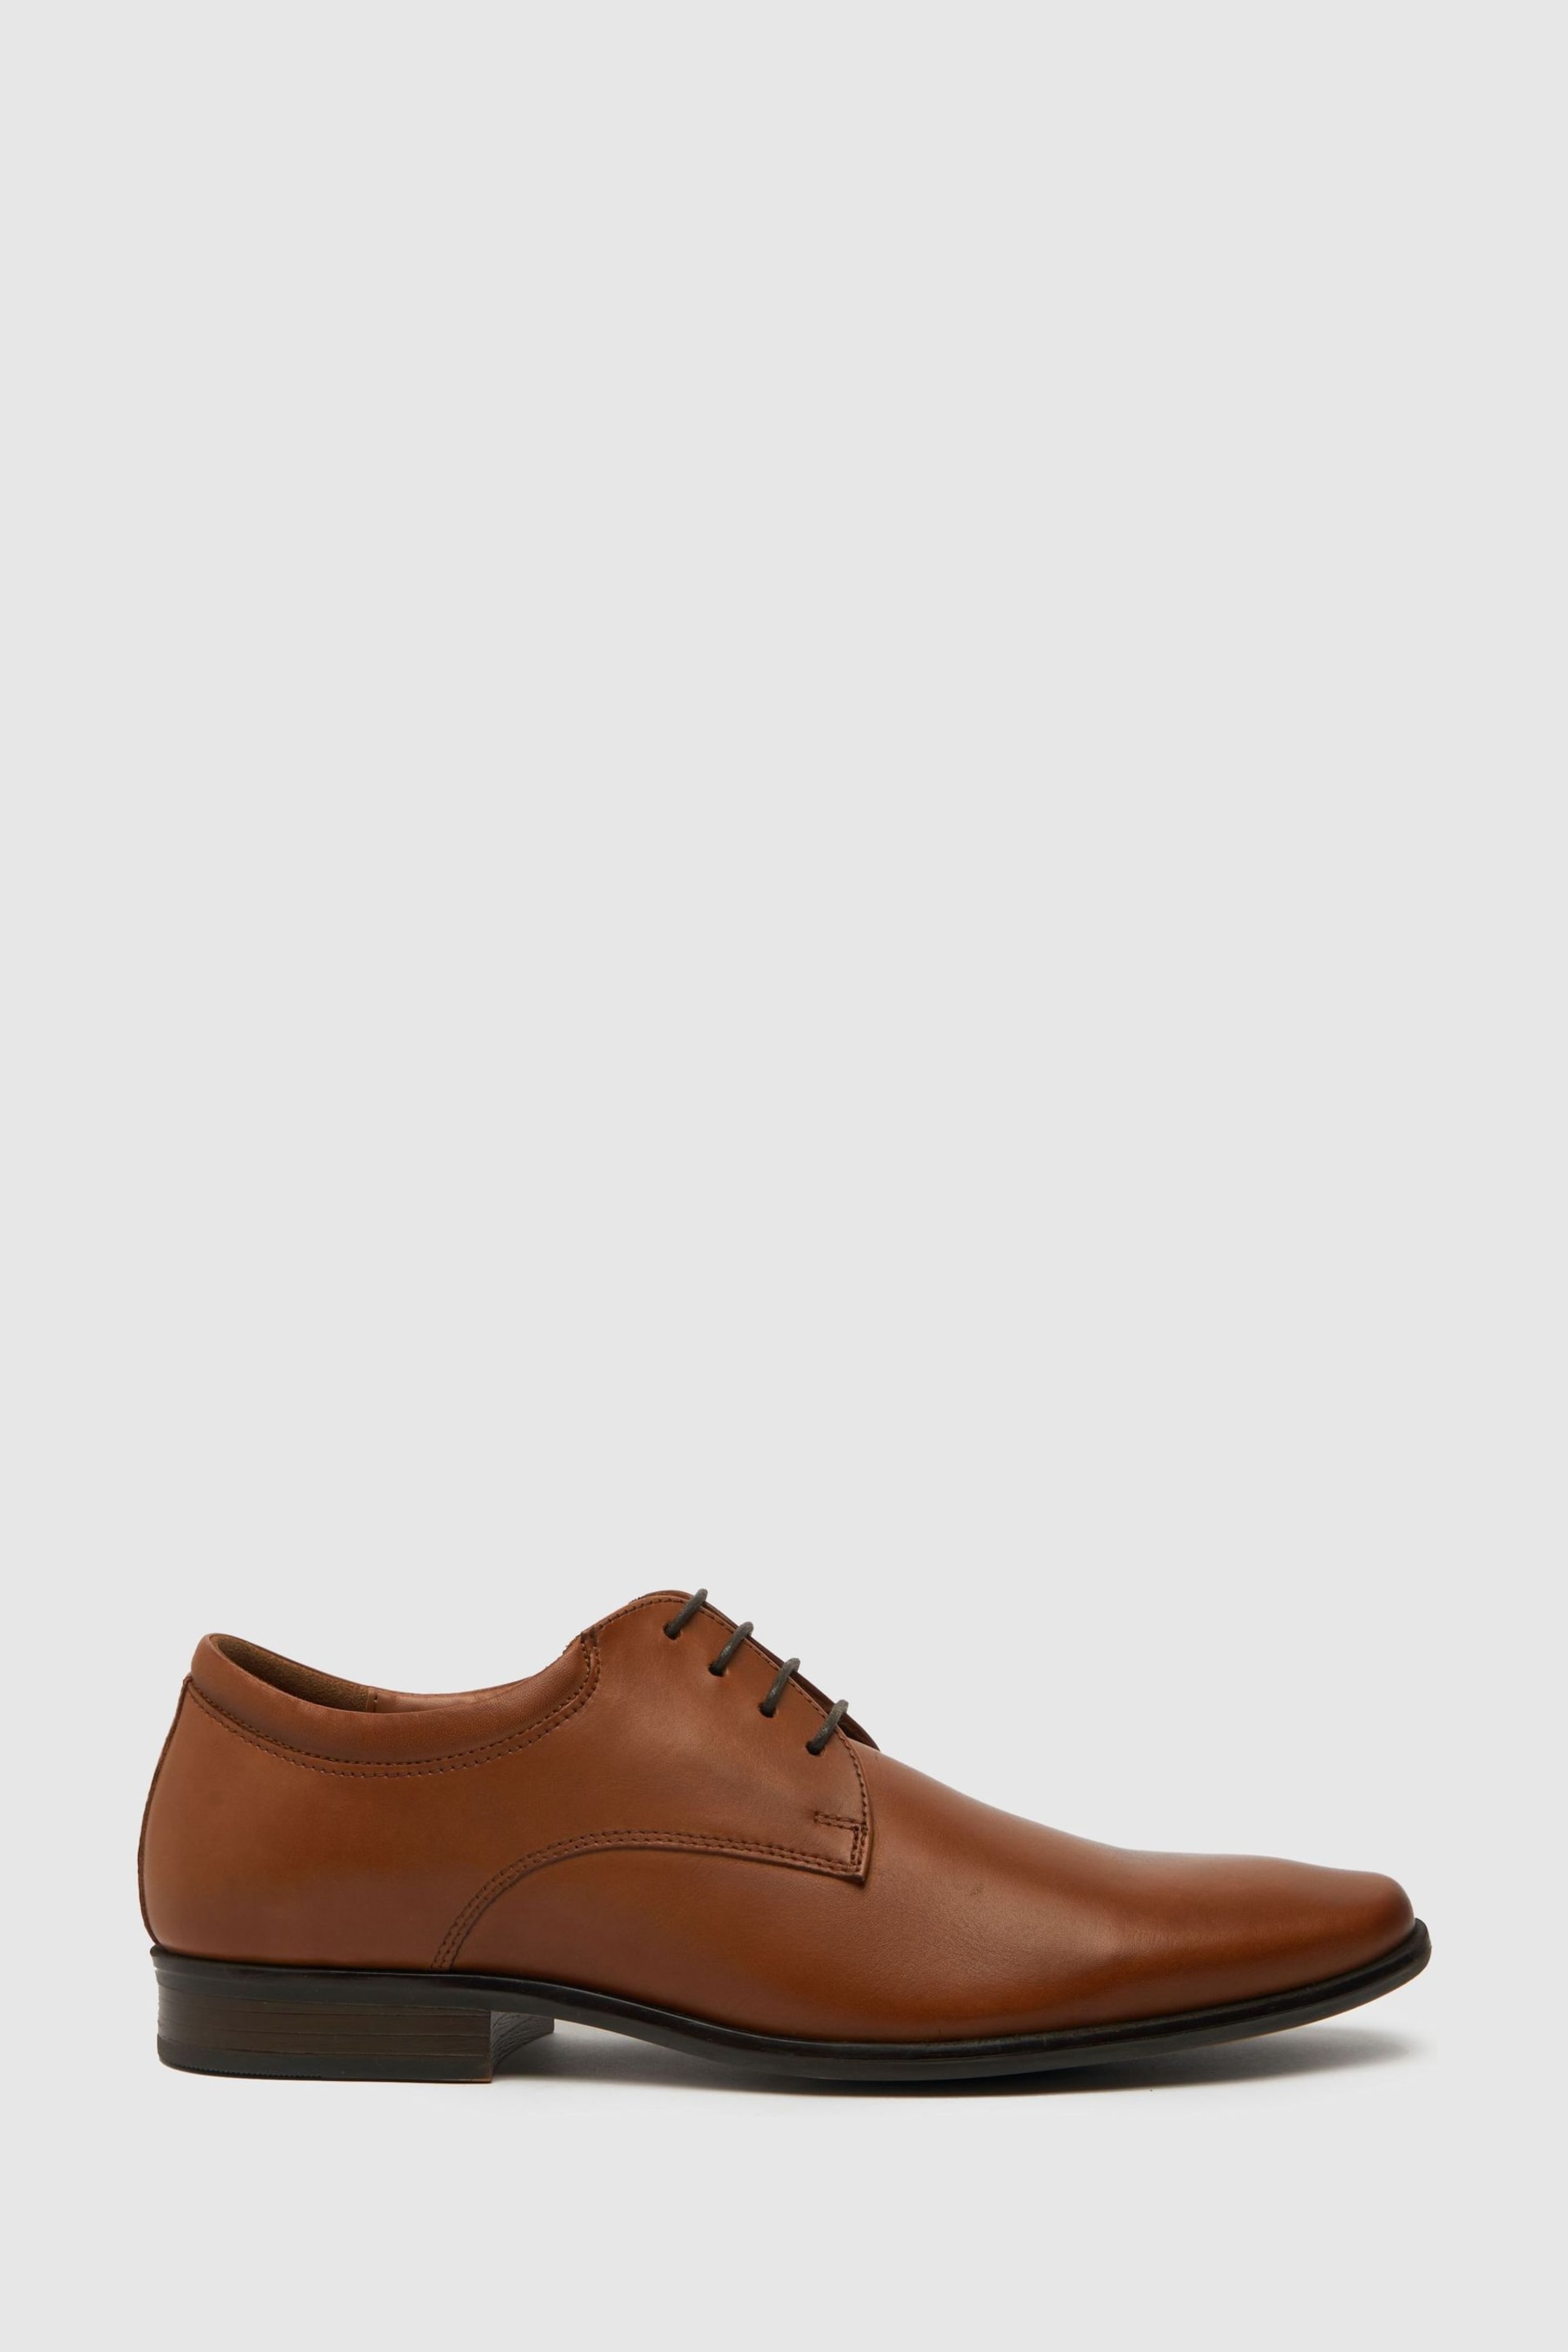 Schuh Ray Leather Derby Shoes - Image 1 of 4